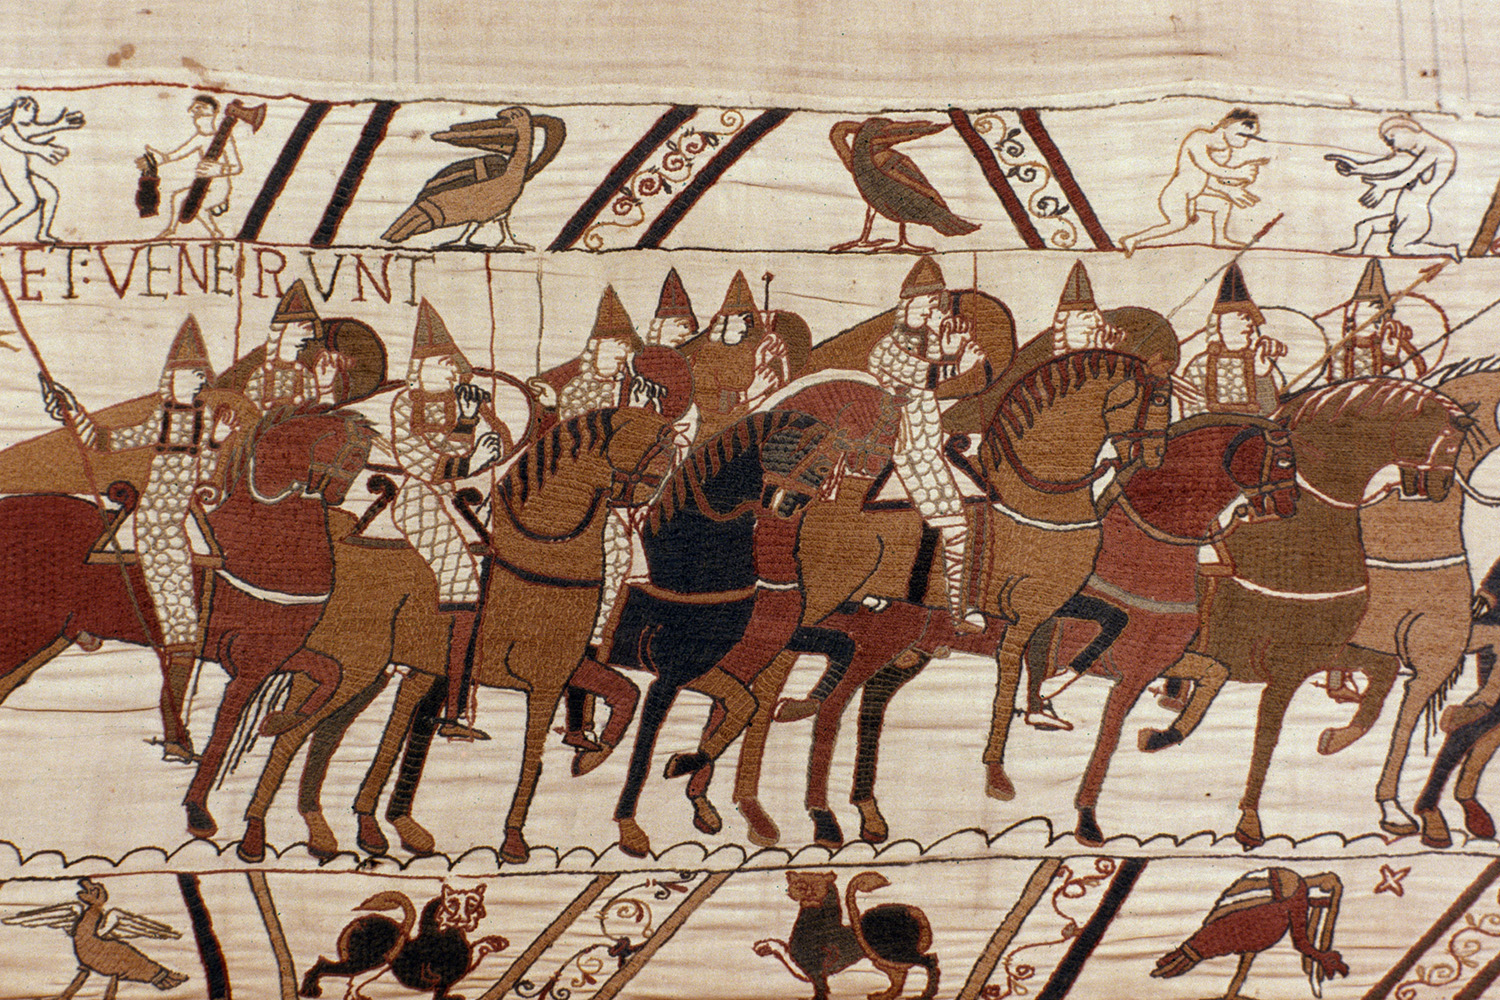 The Other Norman Conquests – The Victors of 1066 Also Fought Wars in the Mediterranean and Middle East